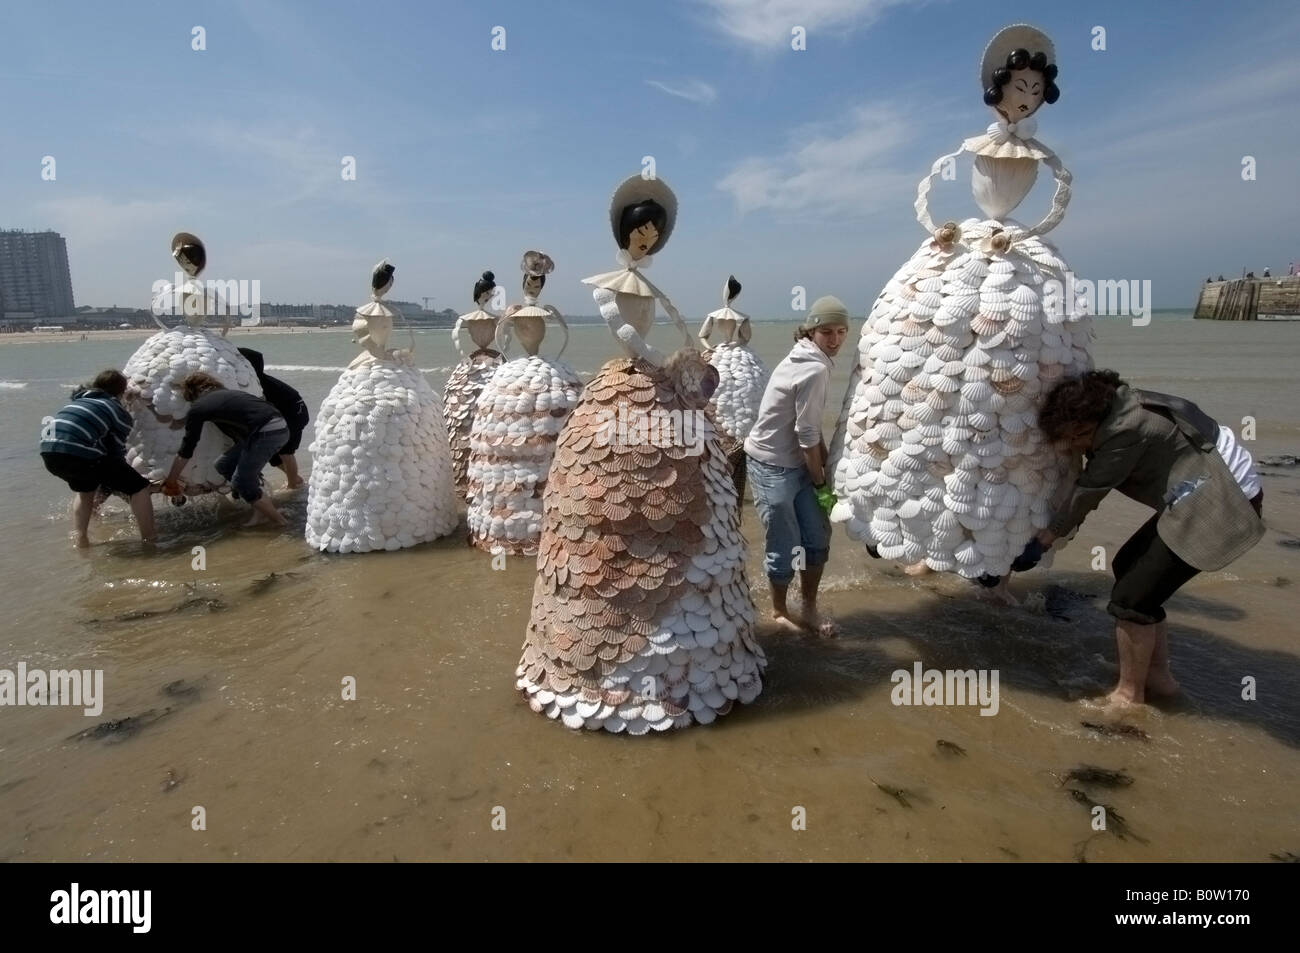 A group of 7ft high shell ladies on Margate Beach Stock Photo